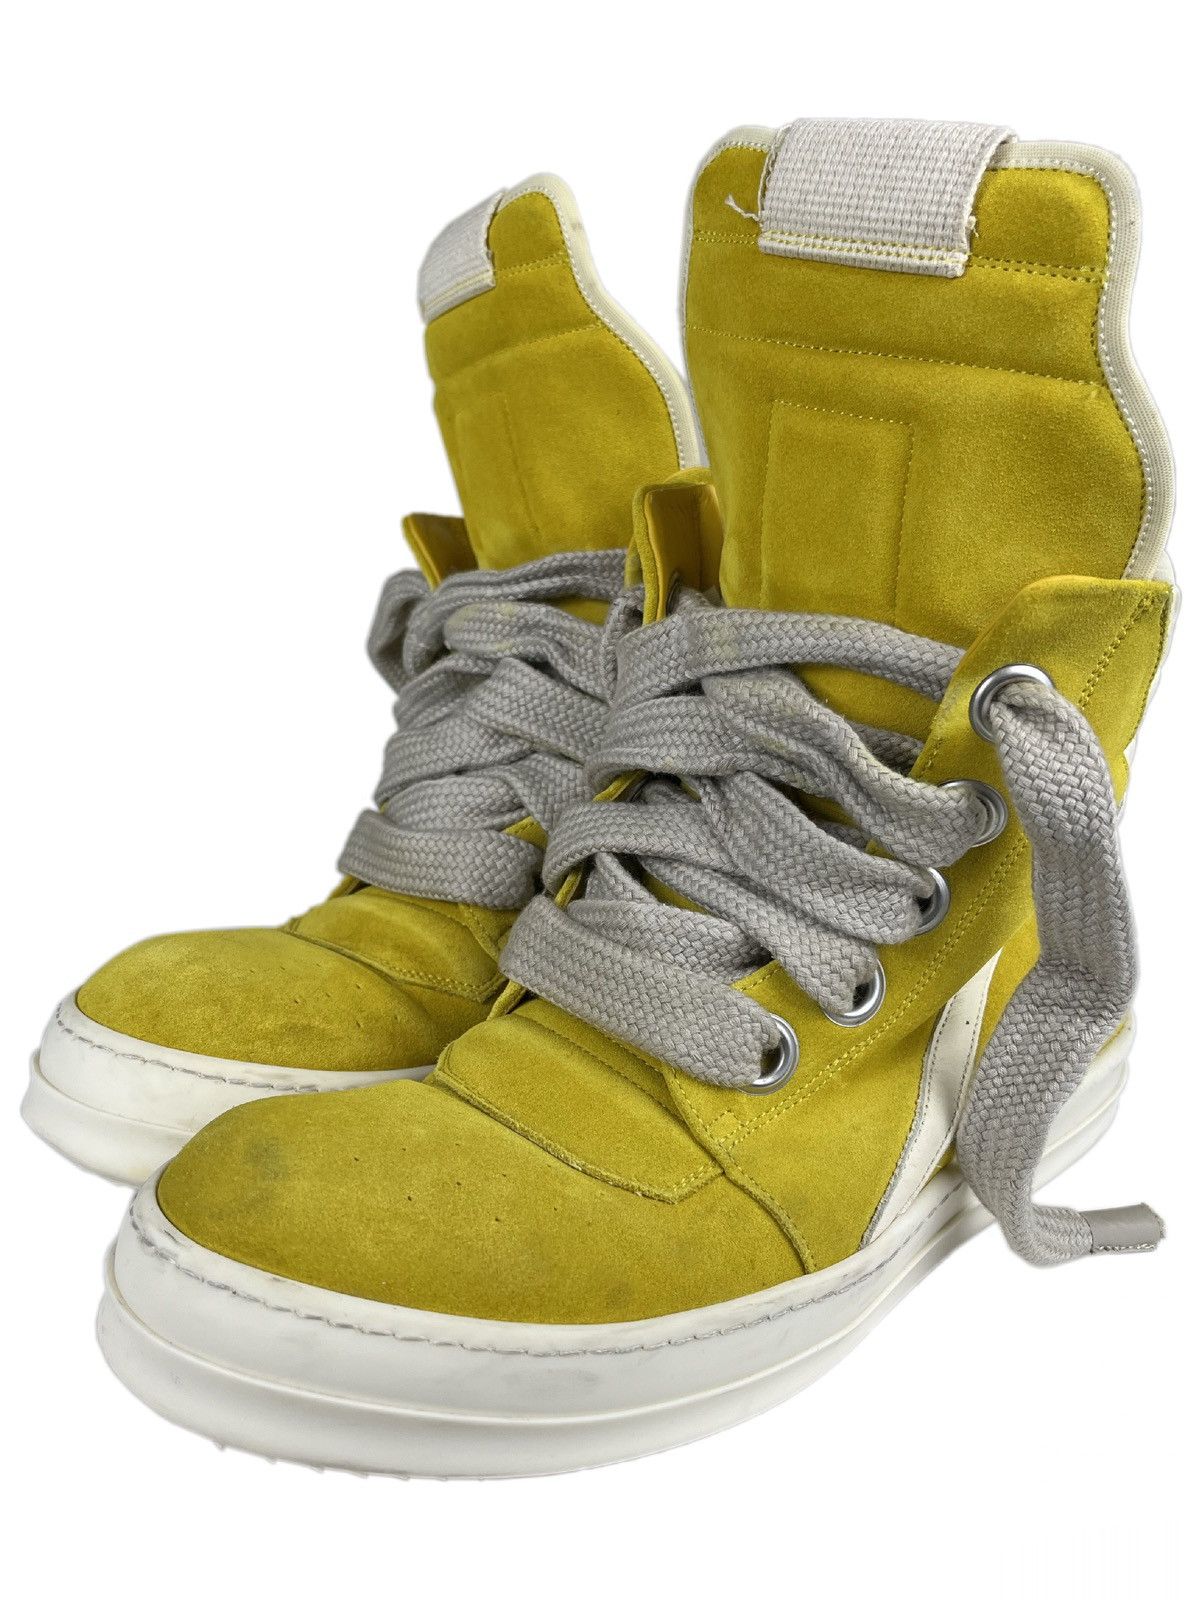 Rick Owens SS23 Rick Owens Yellow Jumbo Lace Suede Leather ...